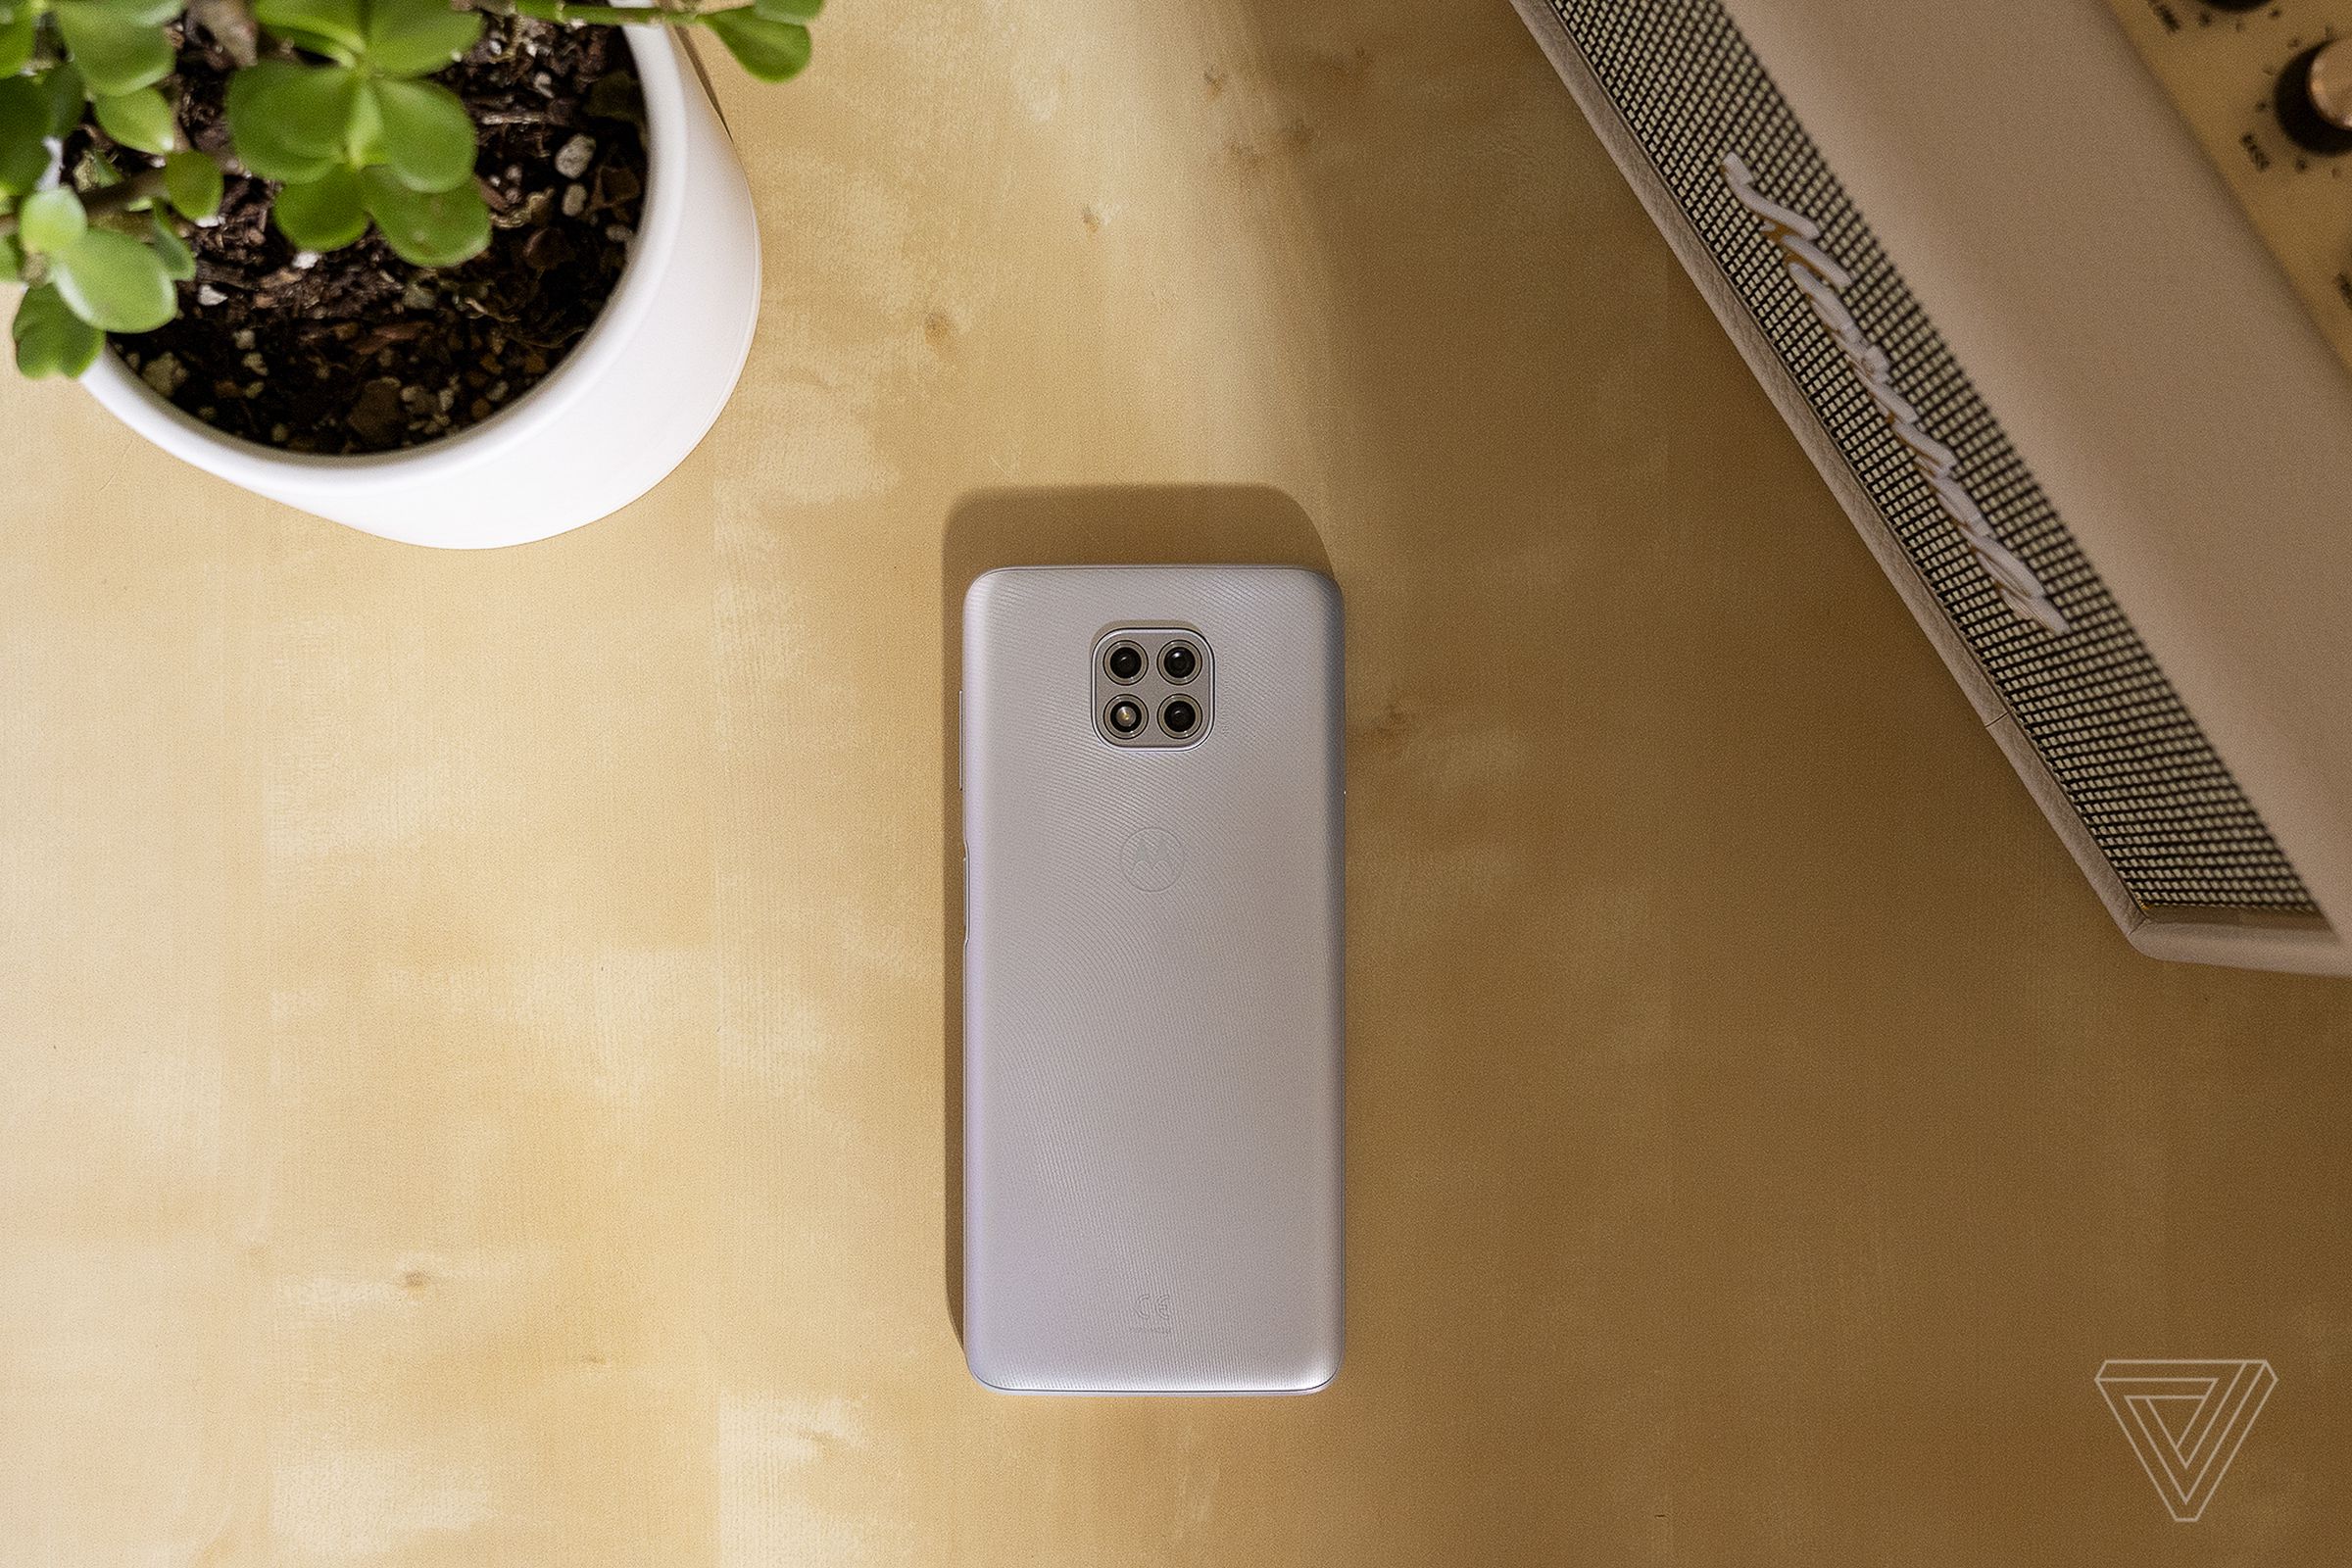 The G Power makes good on its promise of multiday battery life.